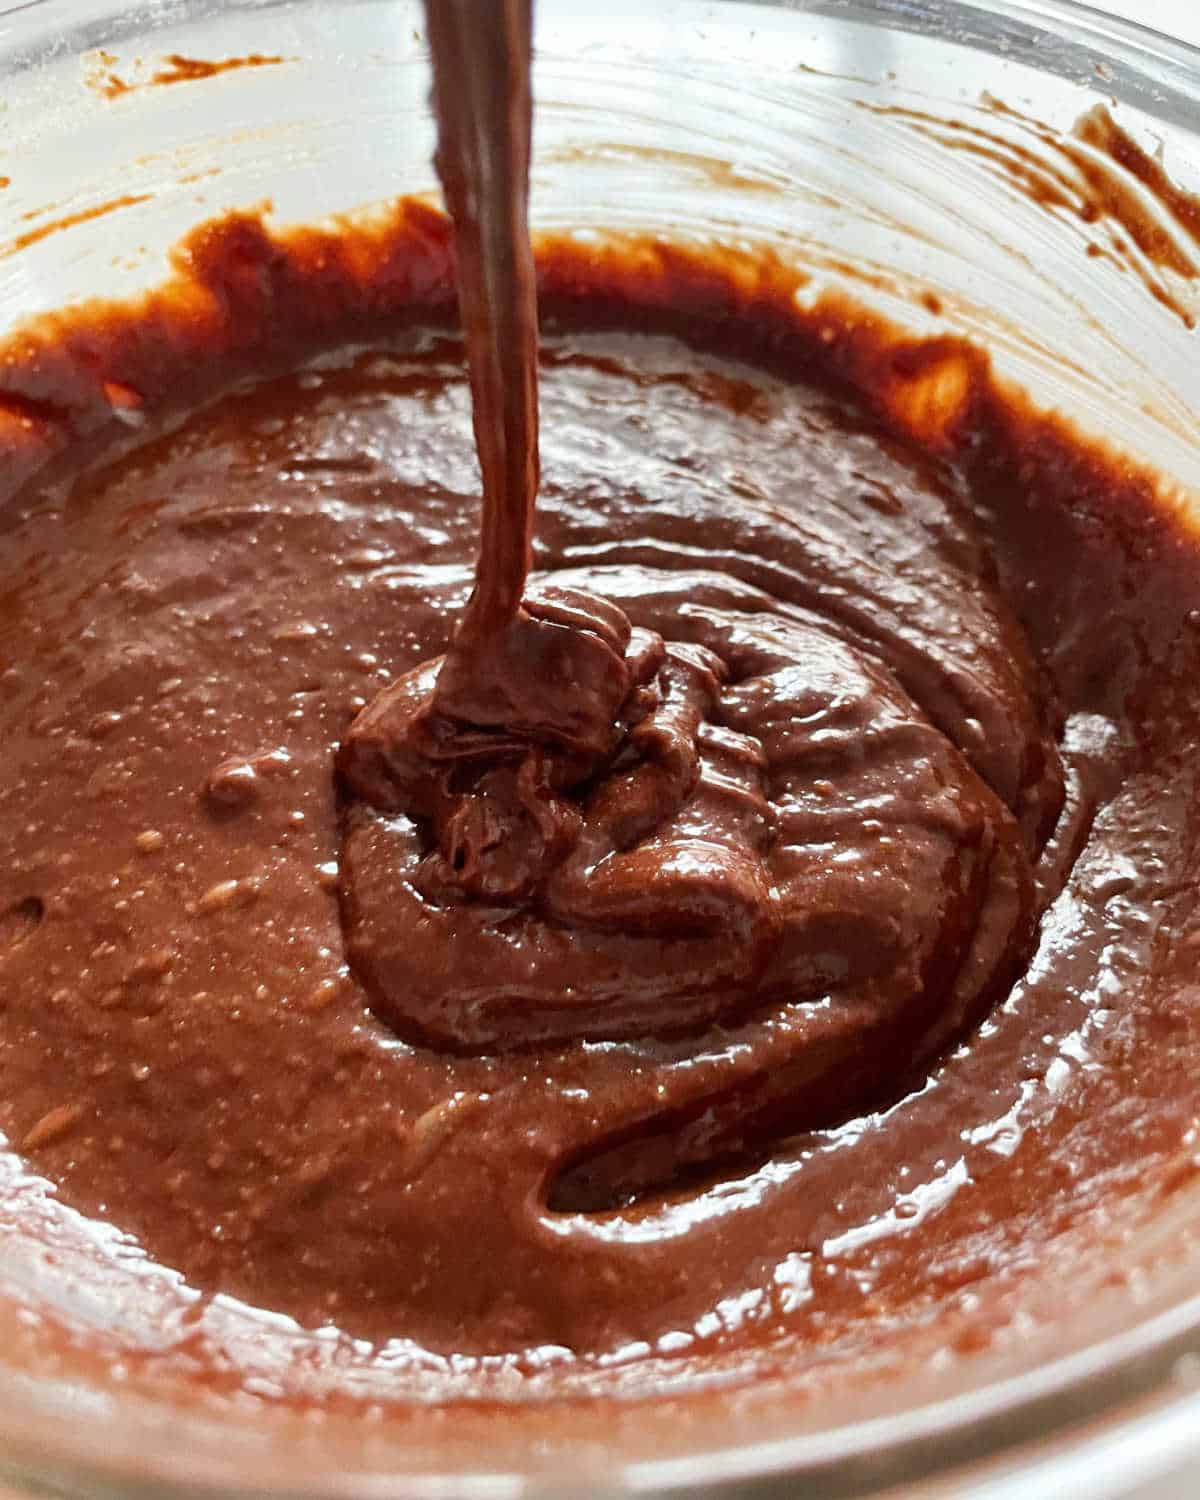 Chocolate batter in a glass bowl.